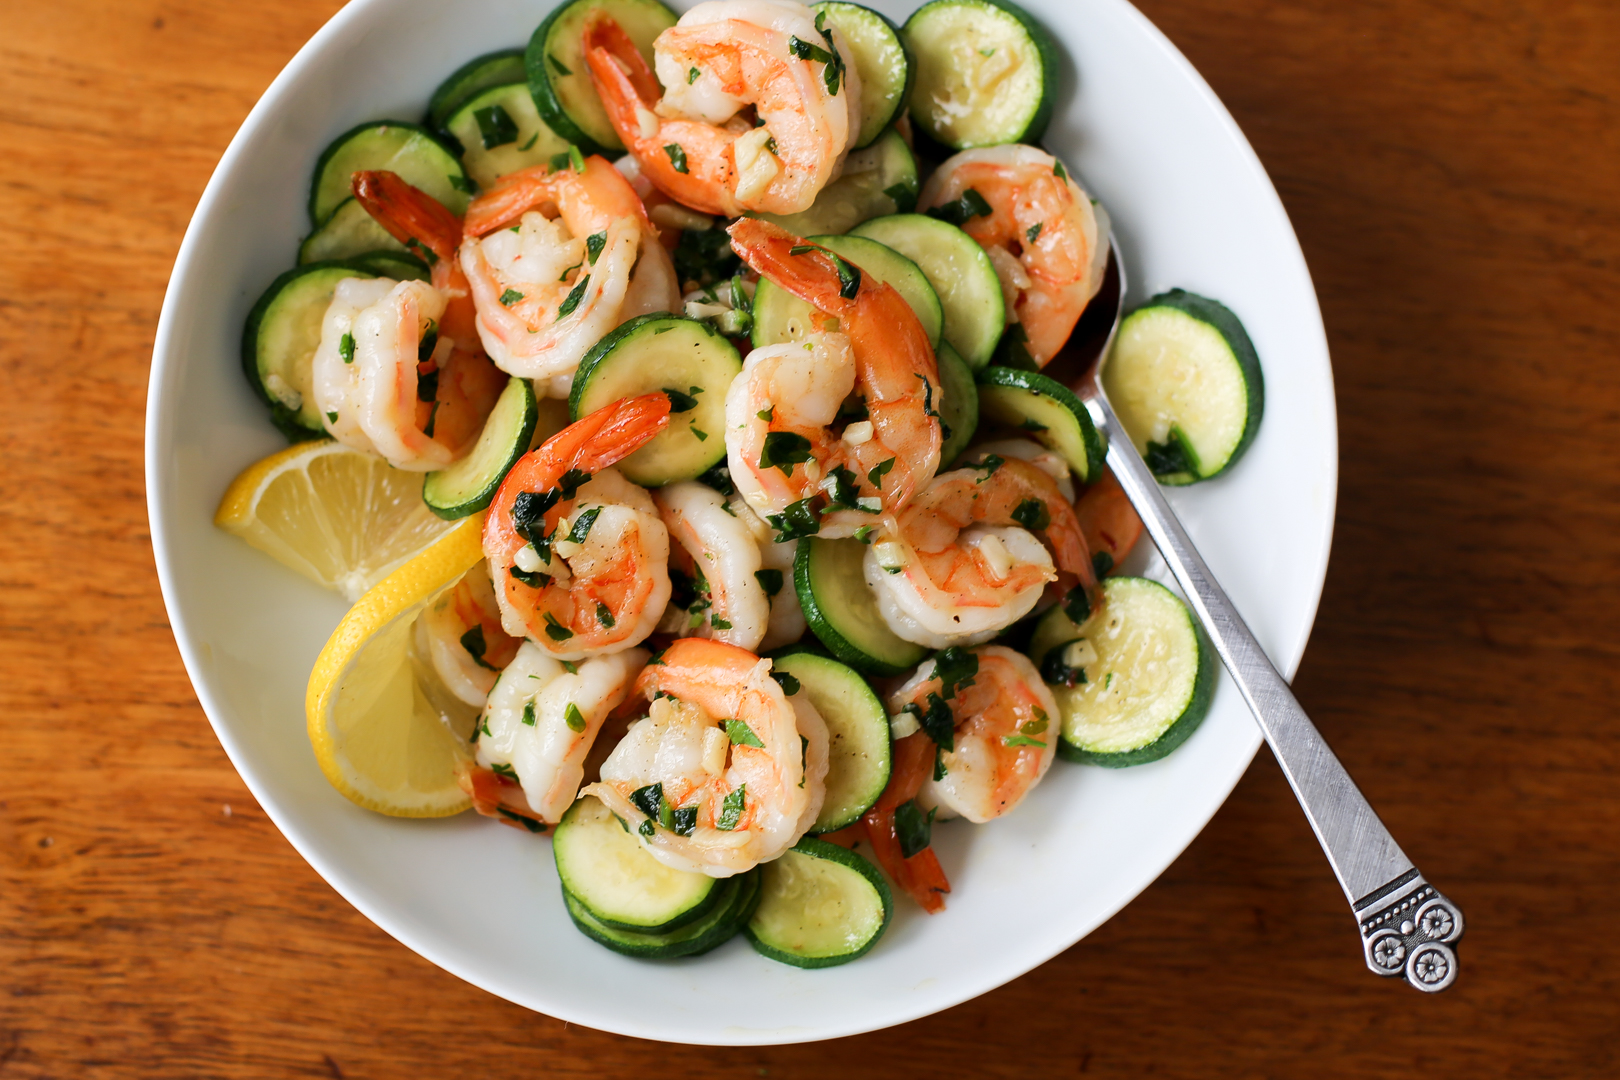 Zucchini and shrimp scampi in a white bowl with lemon slices.